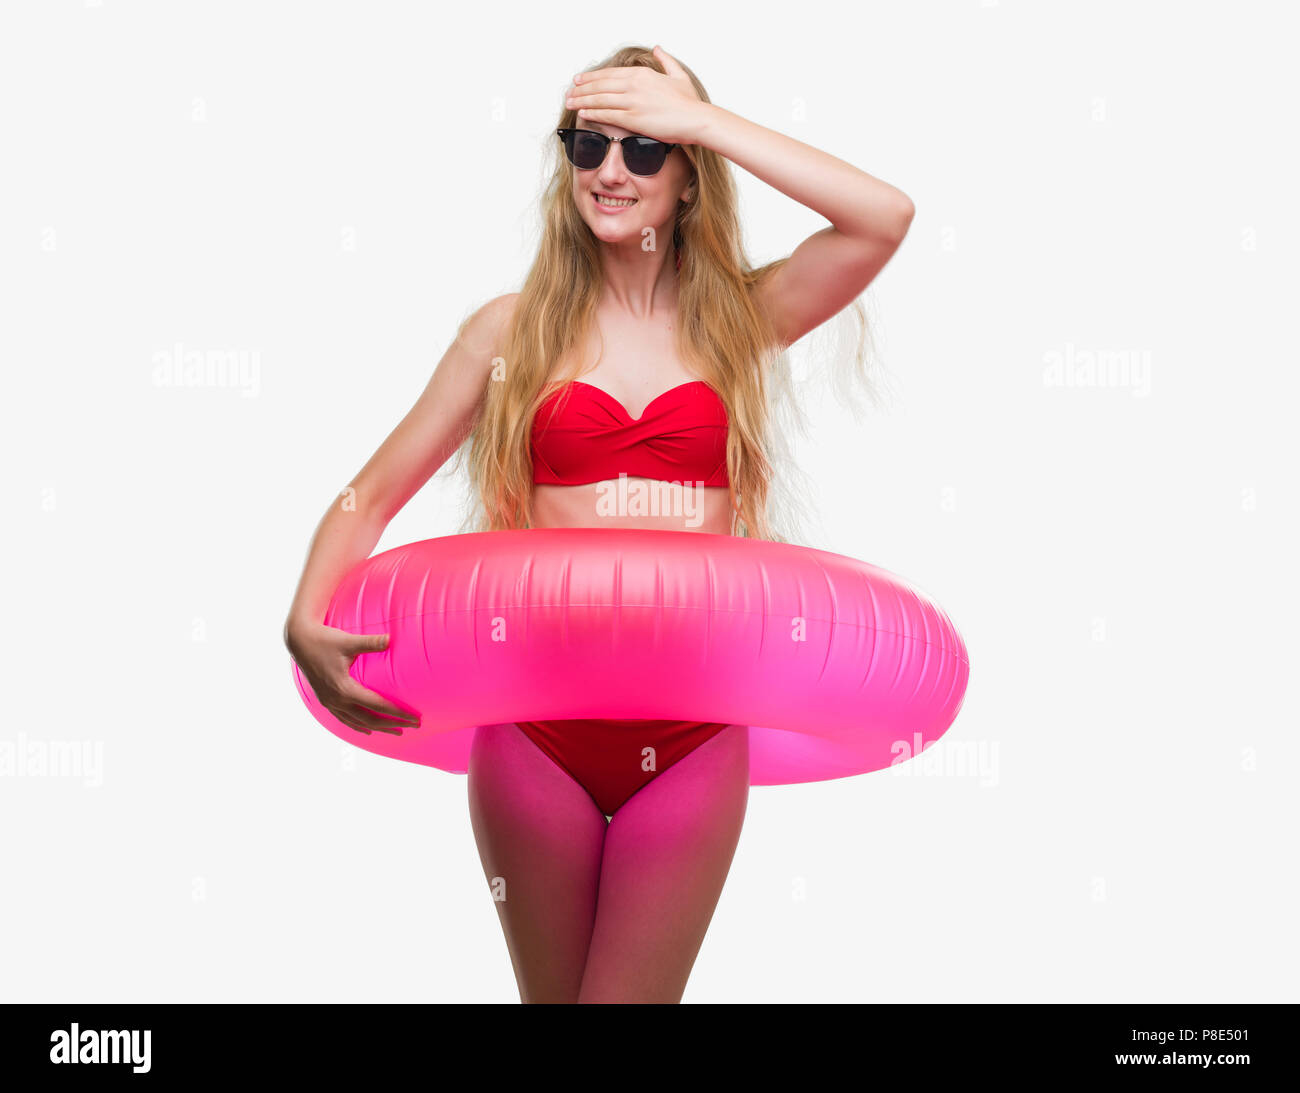 Blonde teenager woman wearing bikini and holding pink floater stressed with  hand on head, shocked with shame and surprise face, angry and frustrated  Stock Photo - Alamy